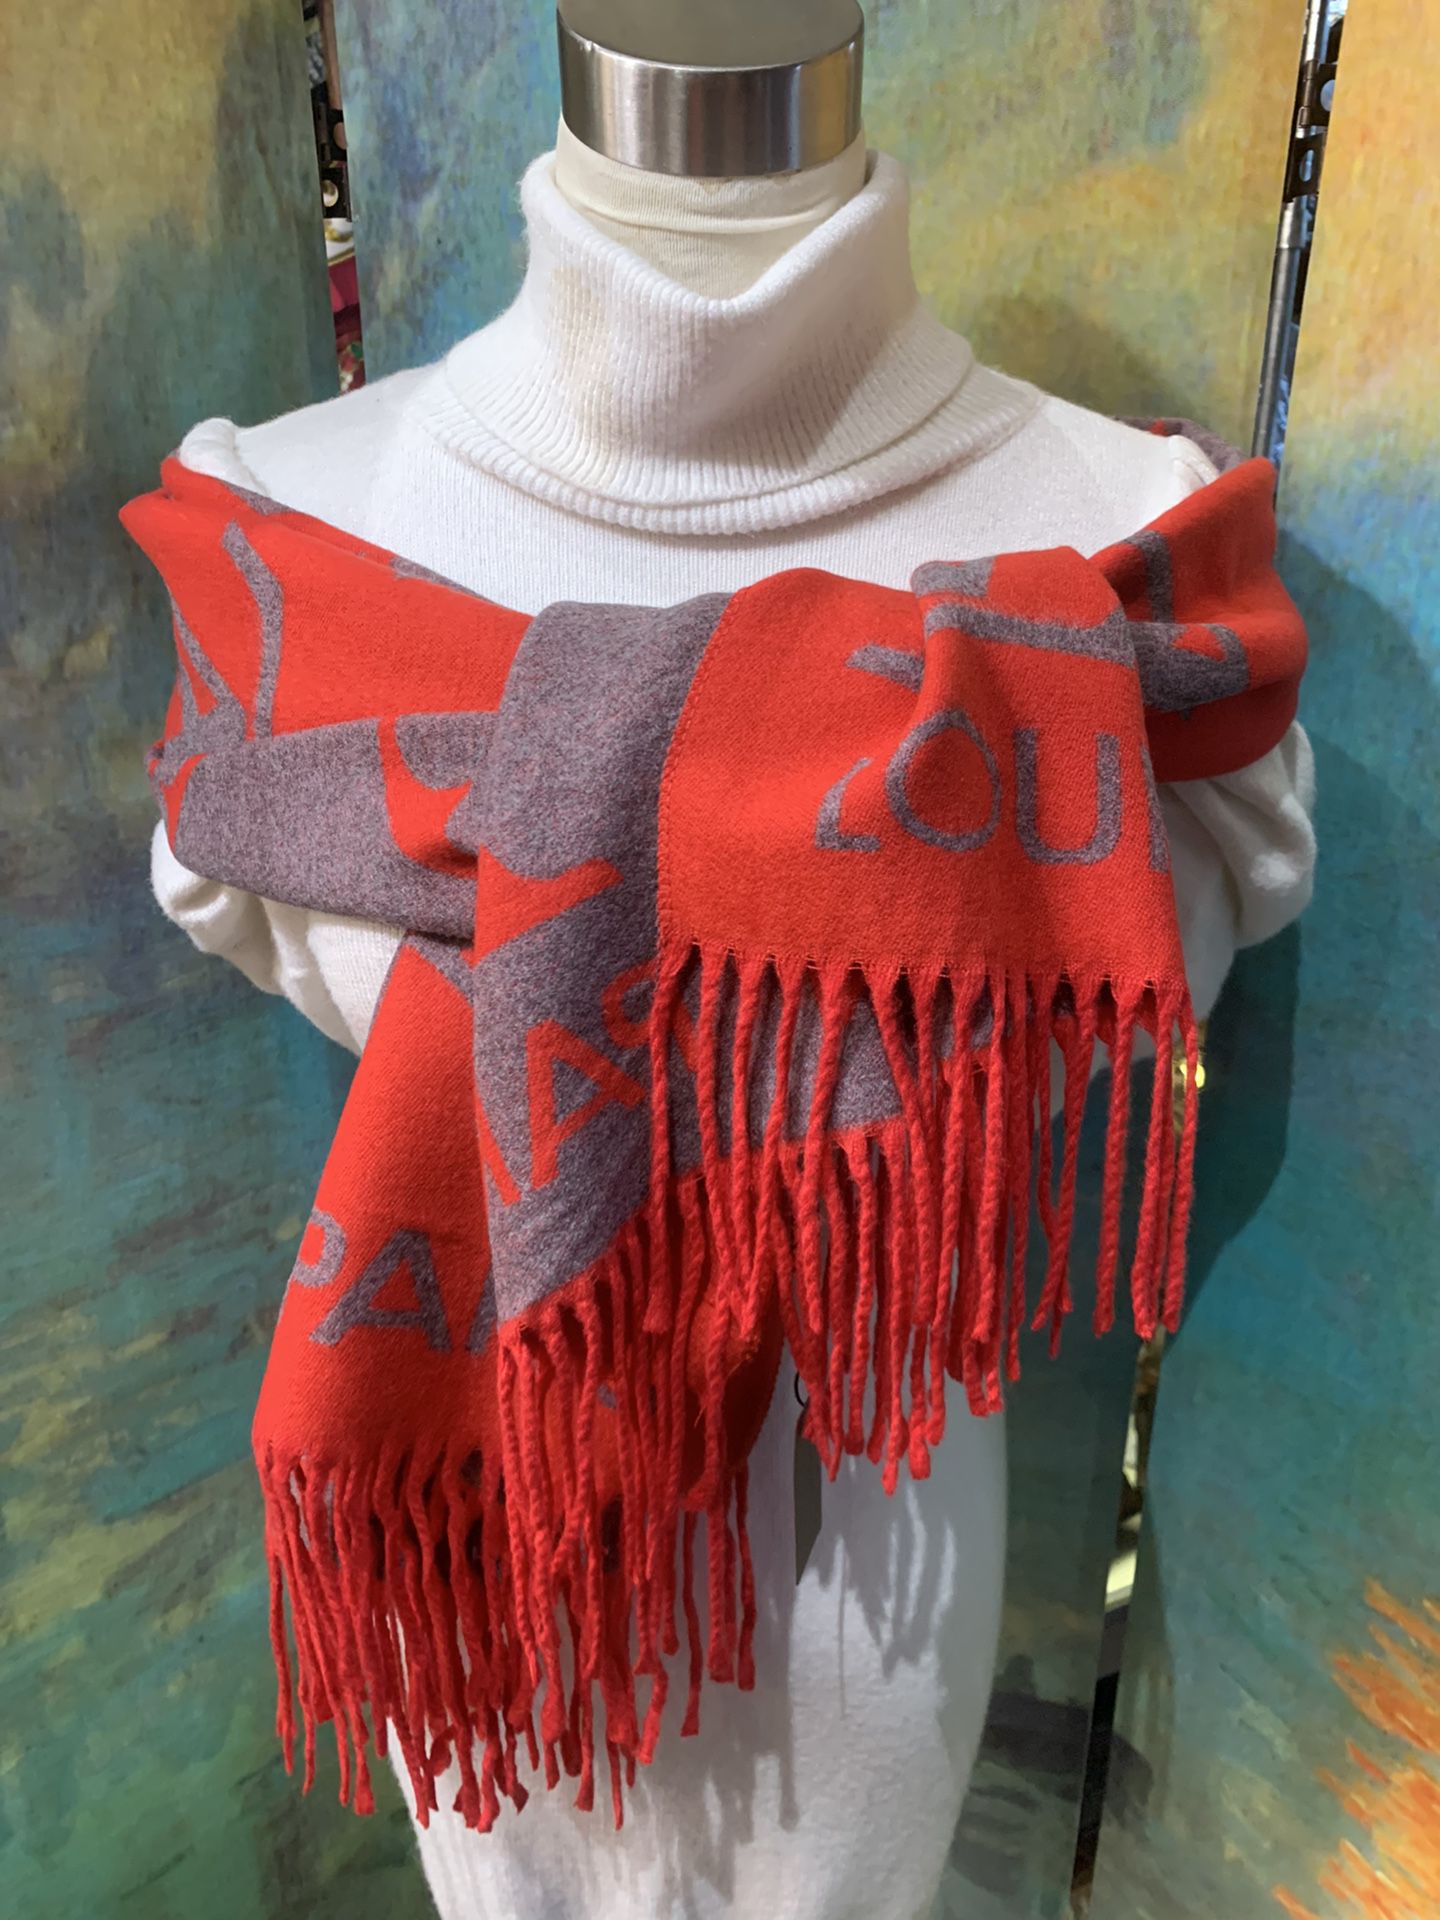 NWT Louis Vuitton bicolor red/gray unisex Cashmere long scarf as new never worn